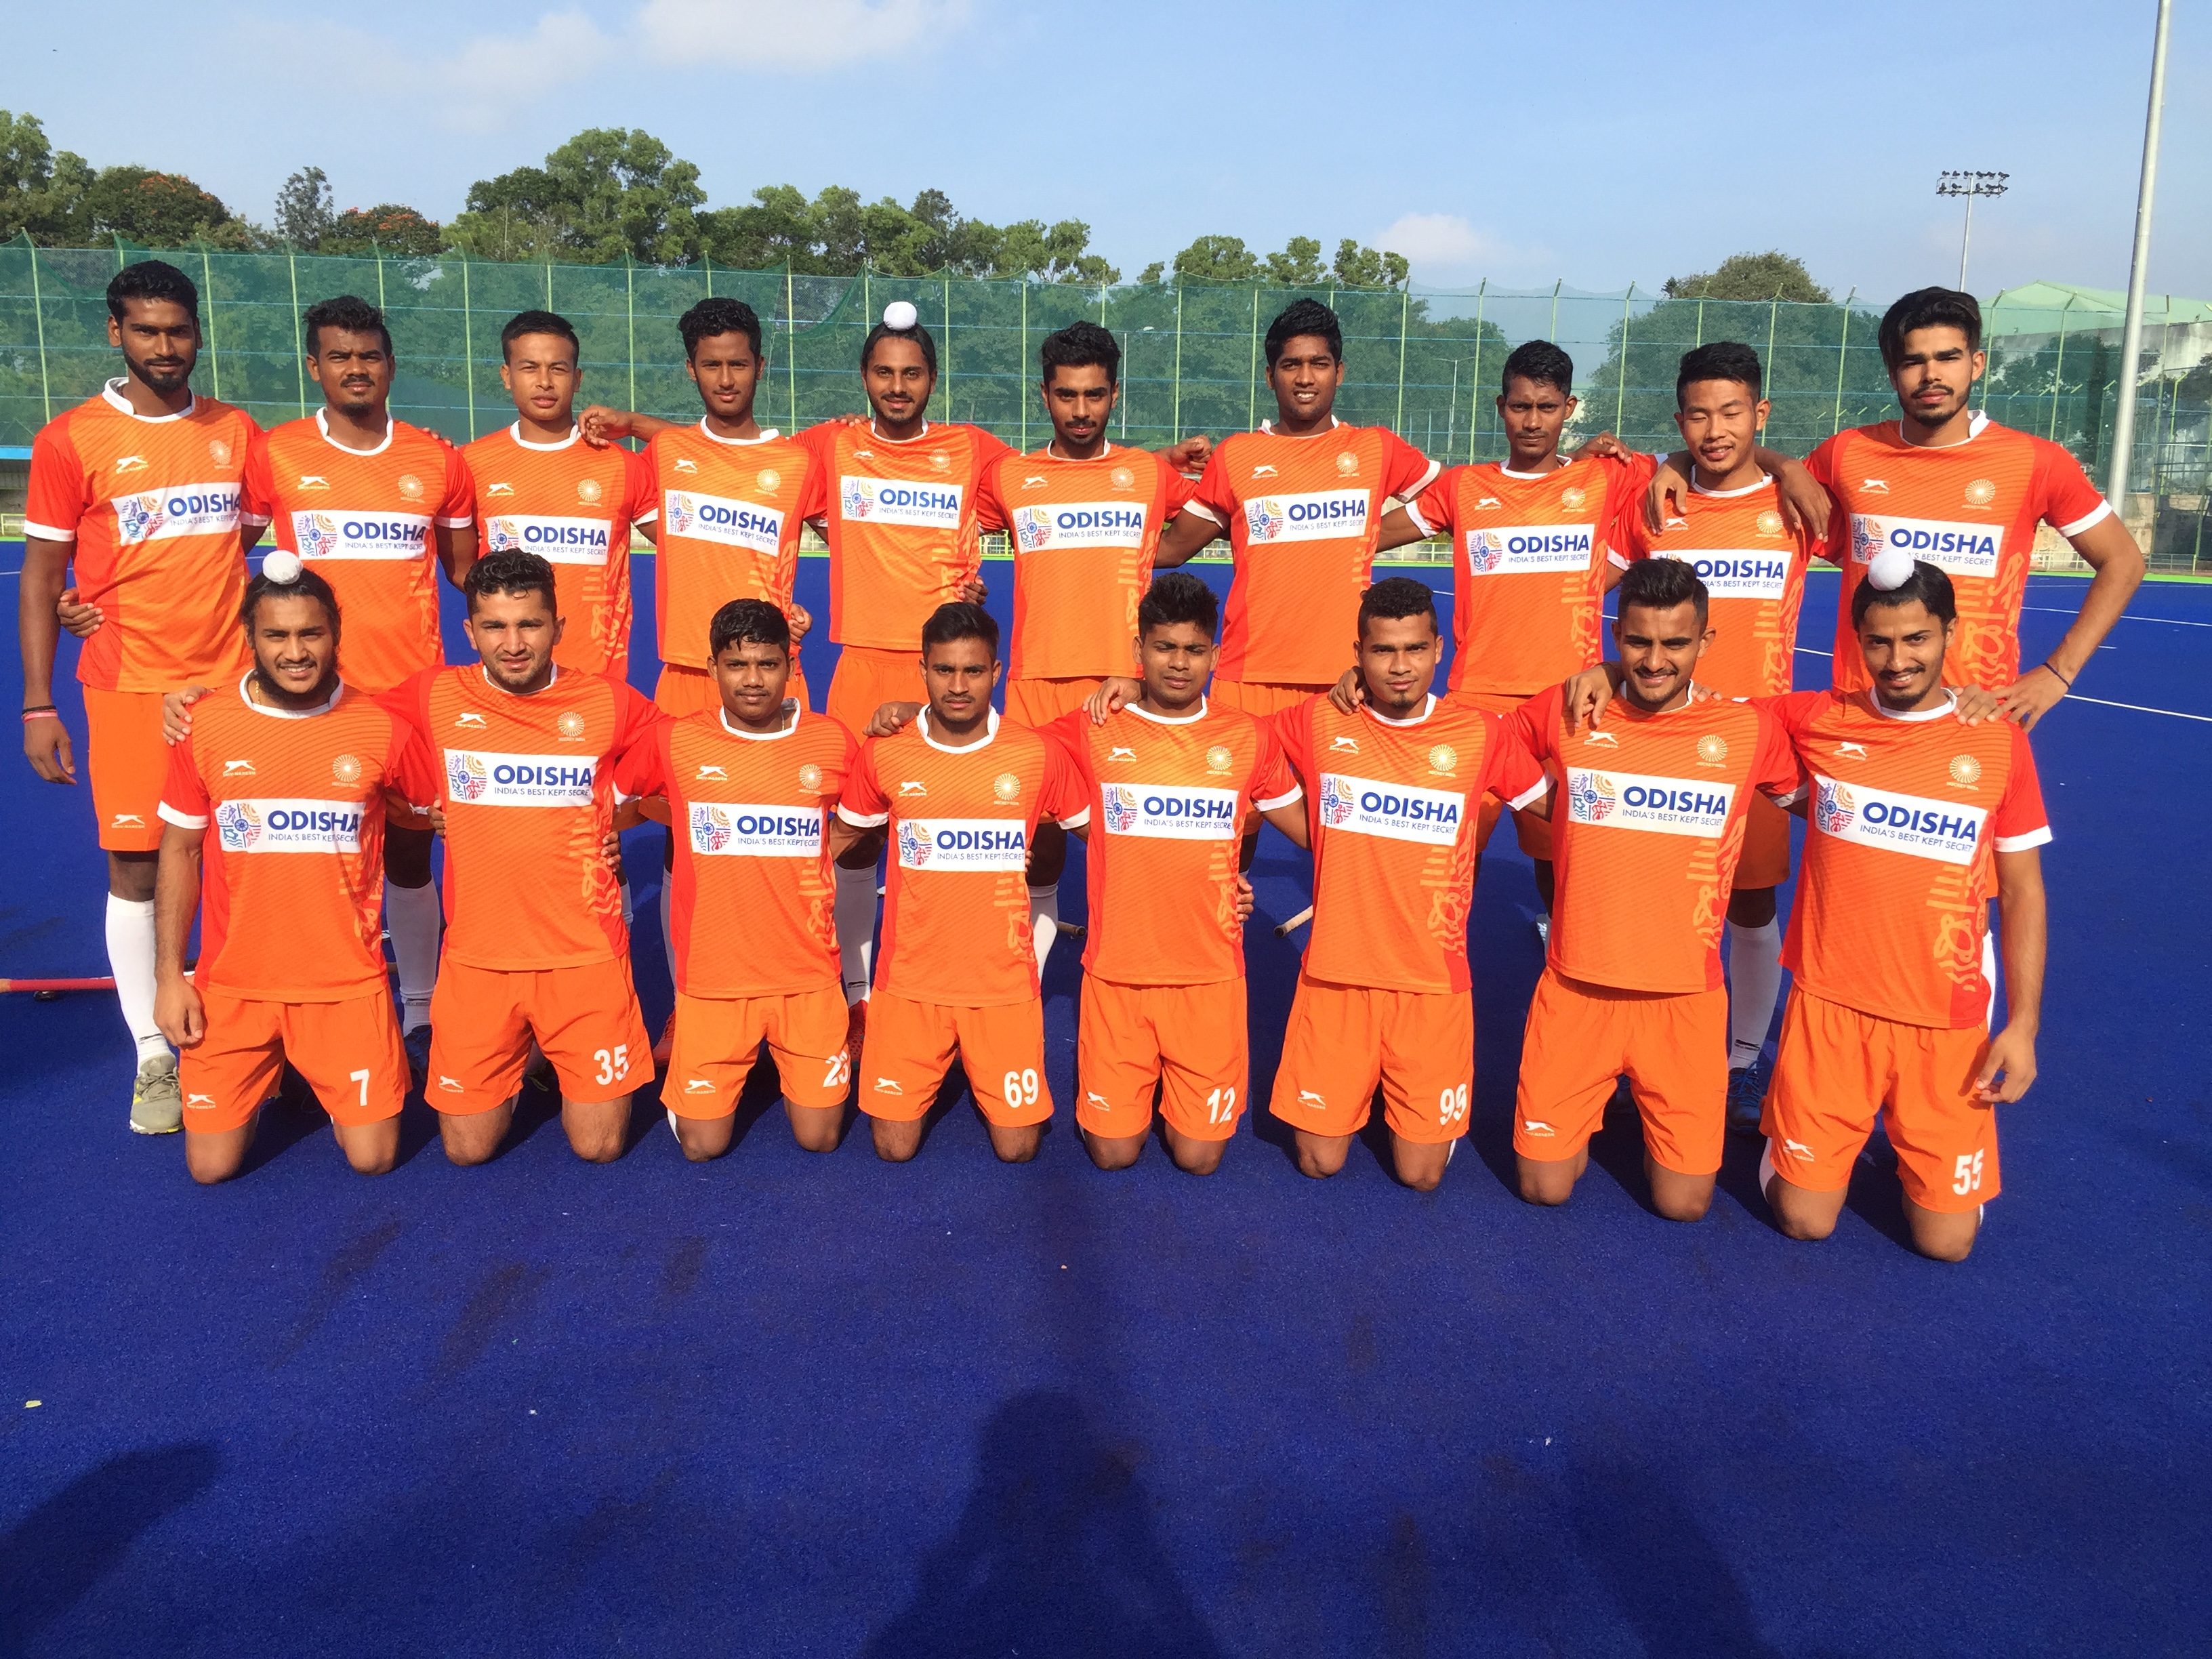 Sultan of Johor Cup | All members are excited and we are raring to go, says Mandeep Mor